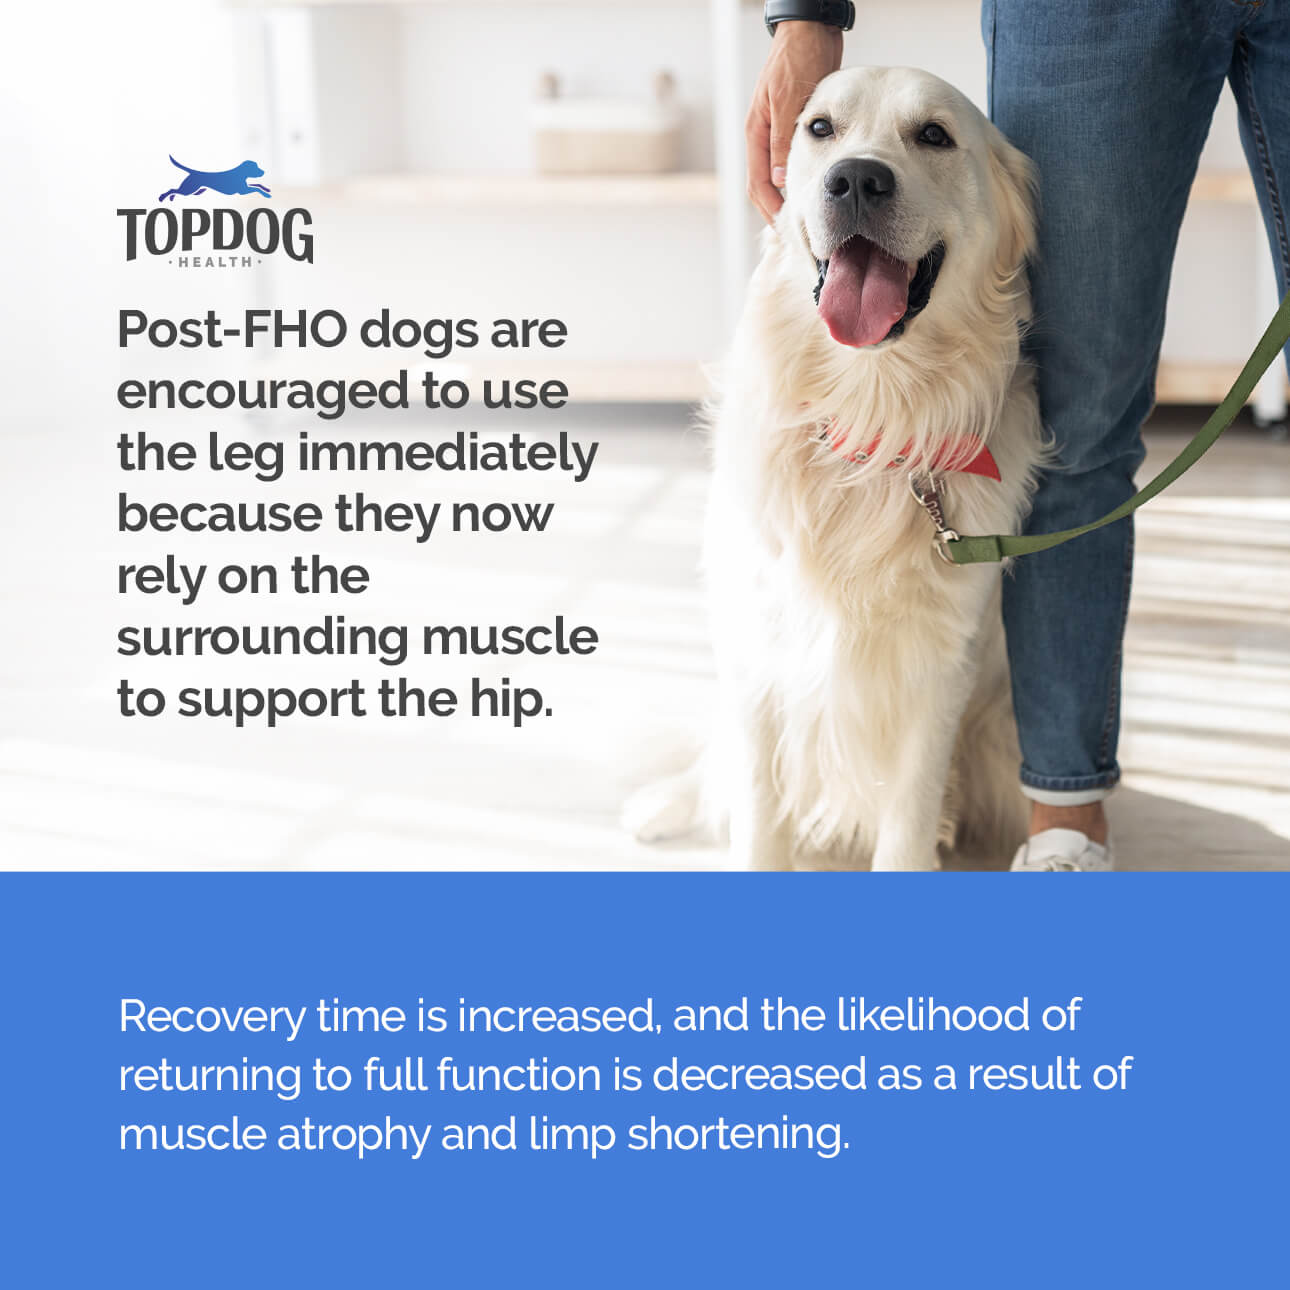 Unlike many other orthopedic surgeries, the dog should be encouraged to use the leg immediately post-op in a controlled manner.